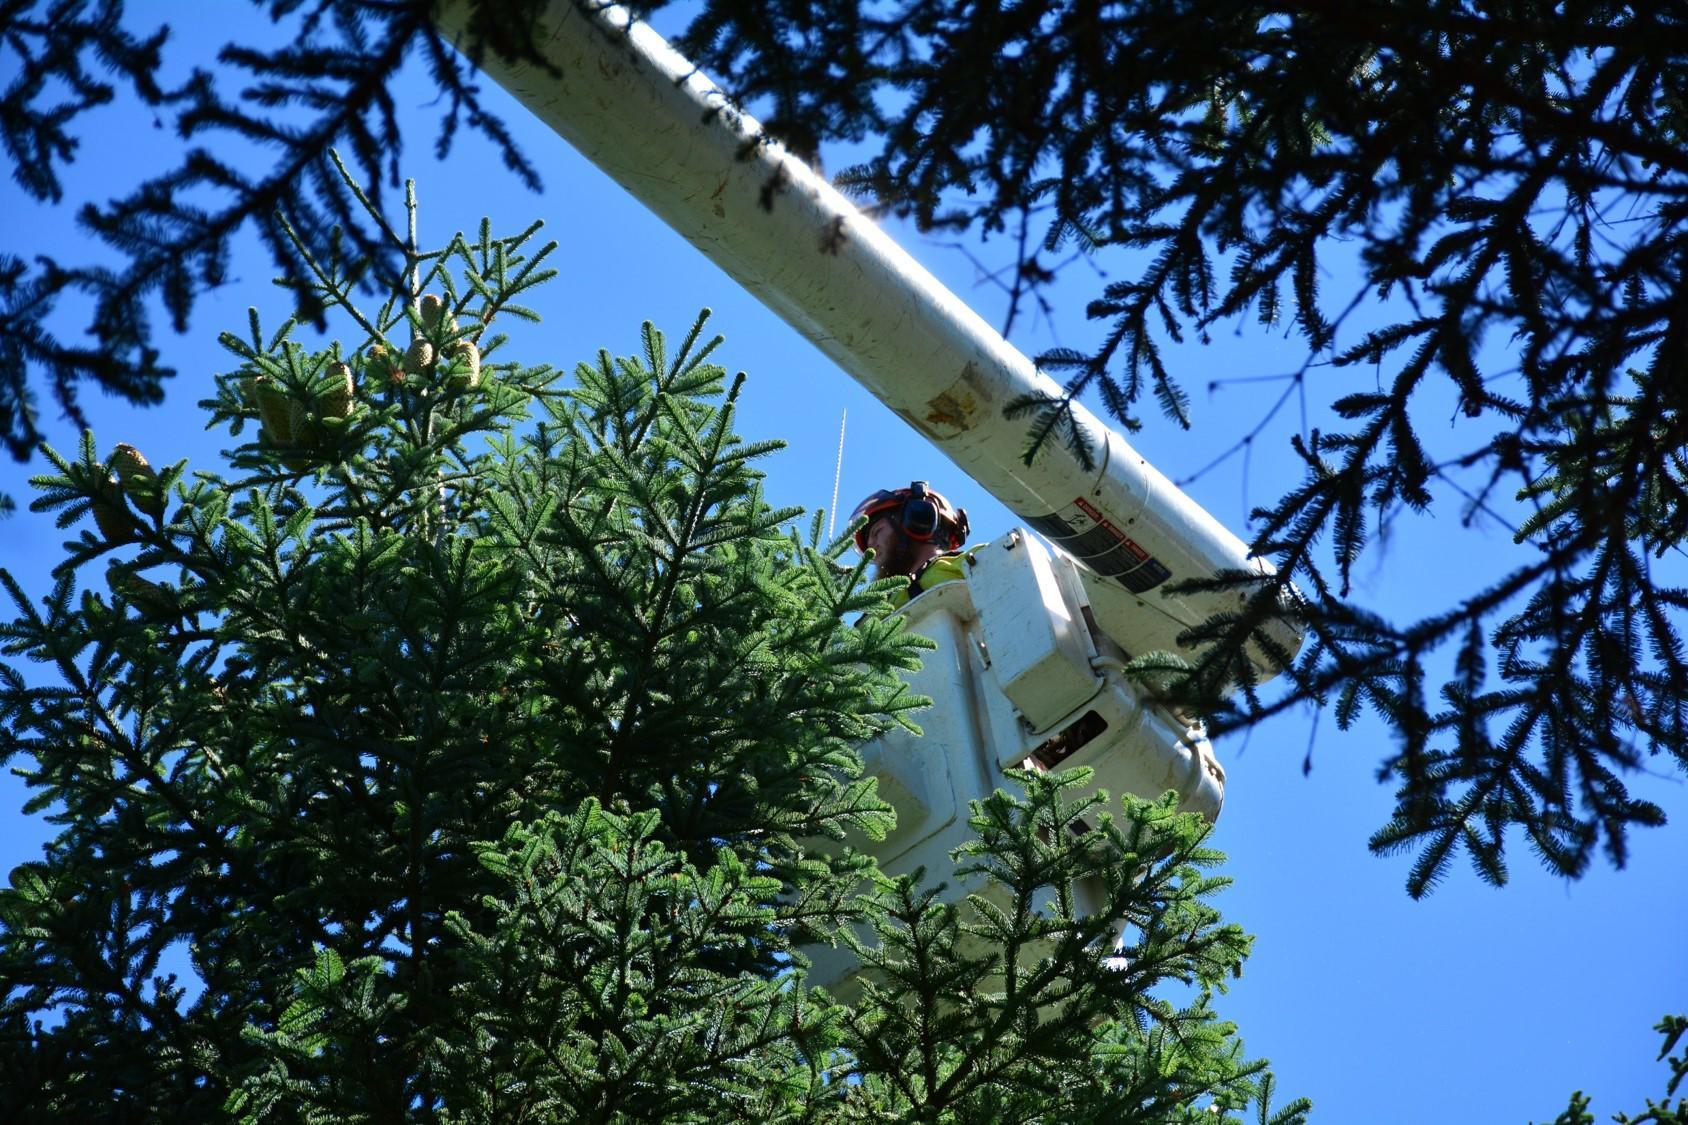 An 80-foot arbor lift is handy for moving in the tree crowns.